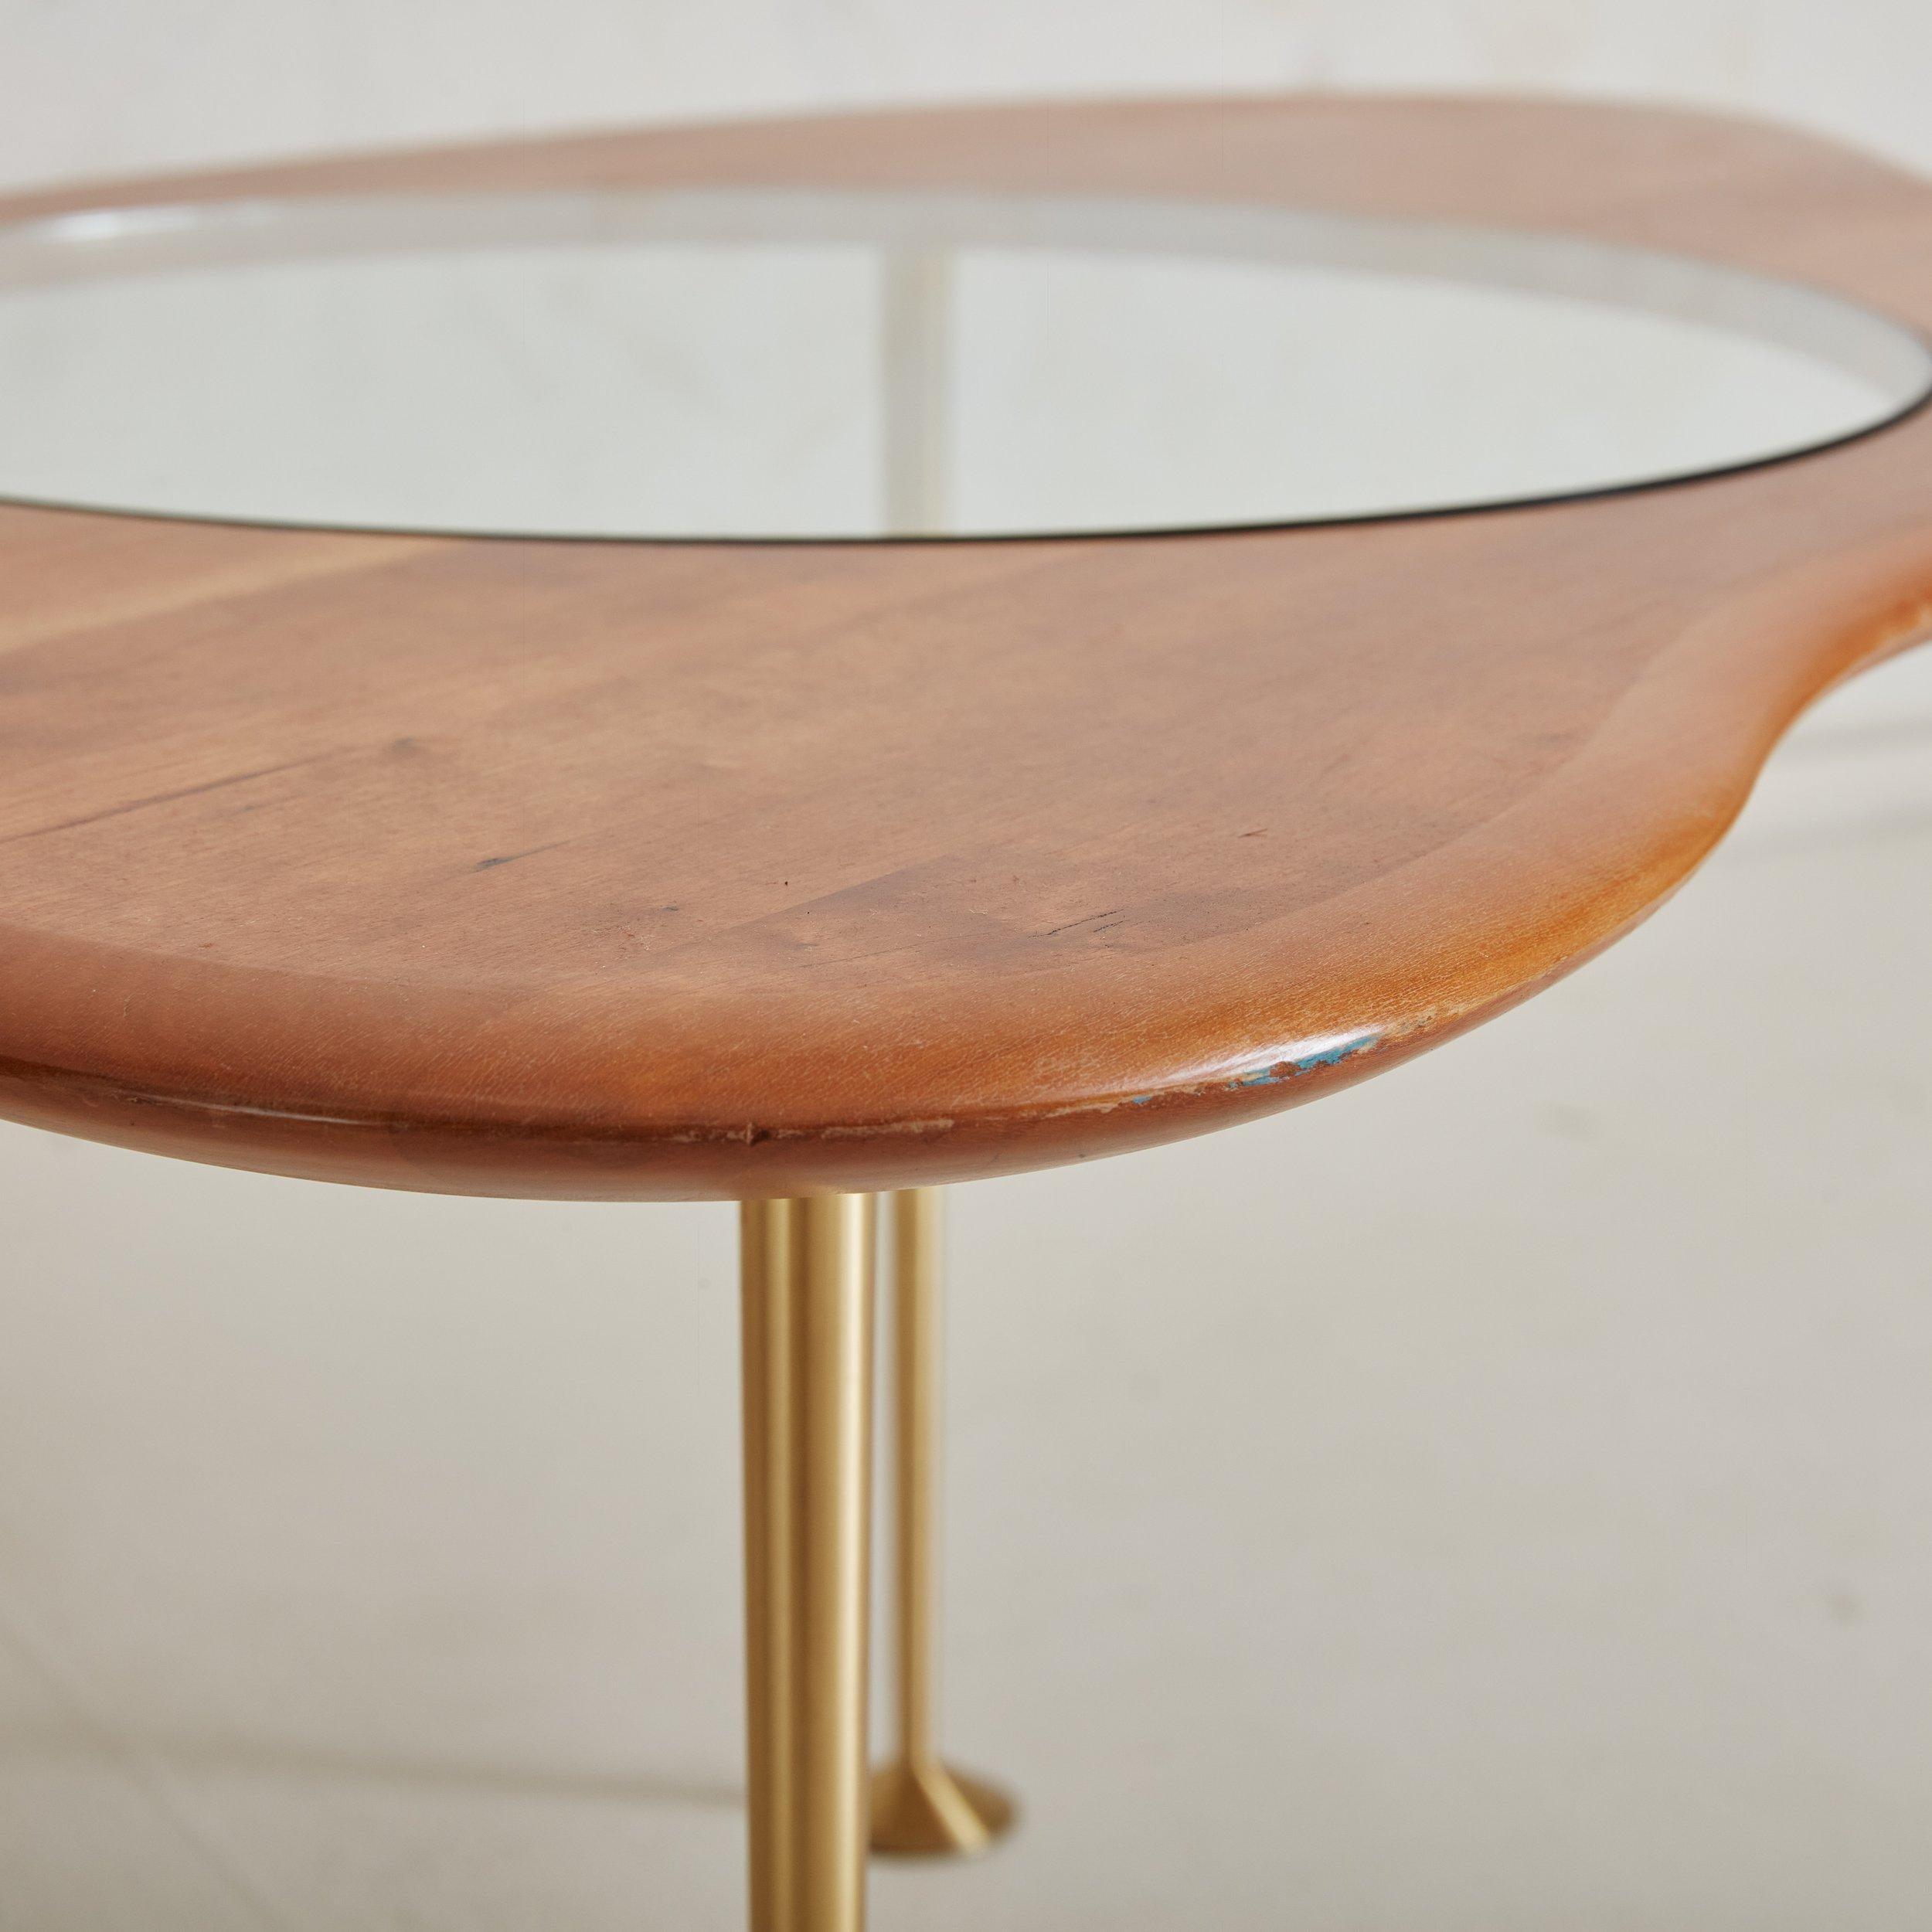 Cherry Wood + Glass Top Coffee Table with Brass Legs, Mid 20th Century For Sale 2